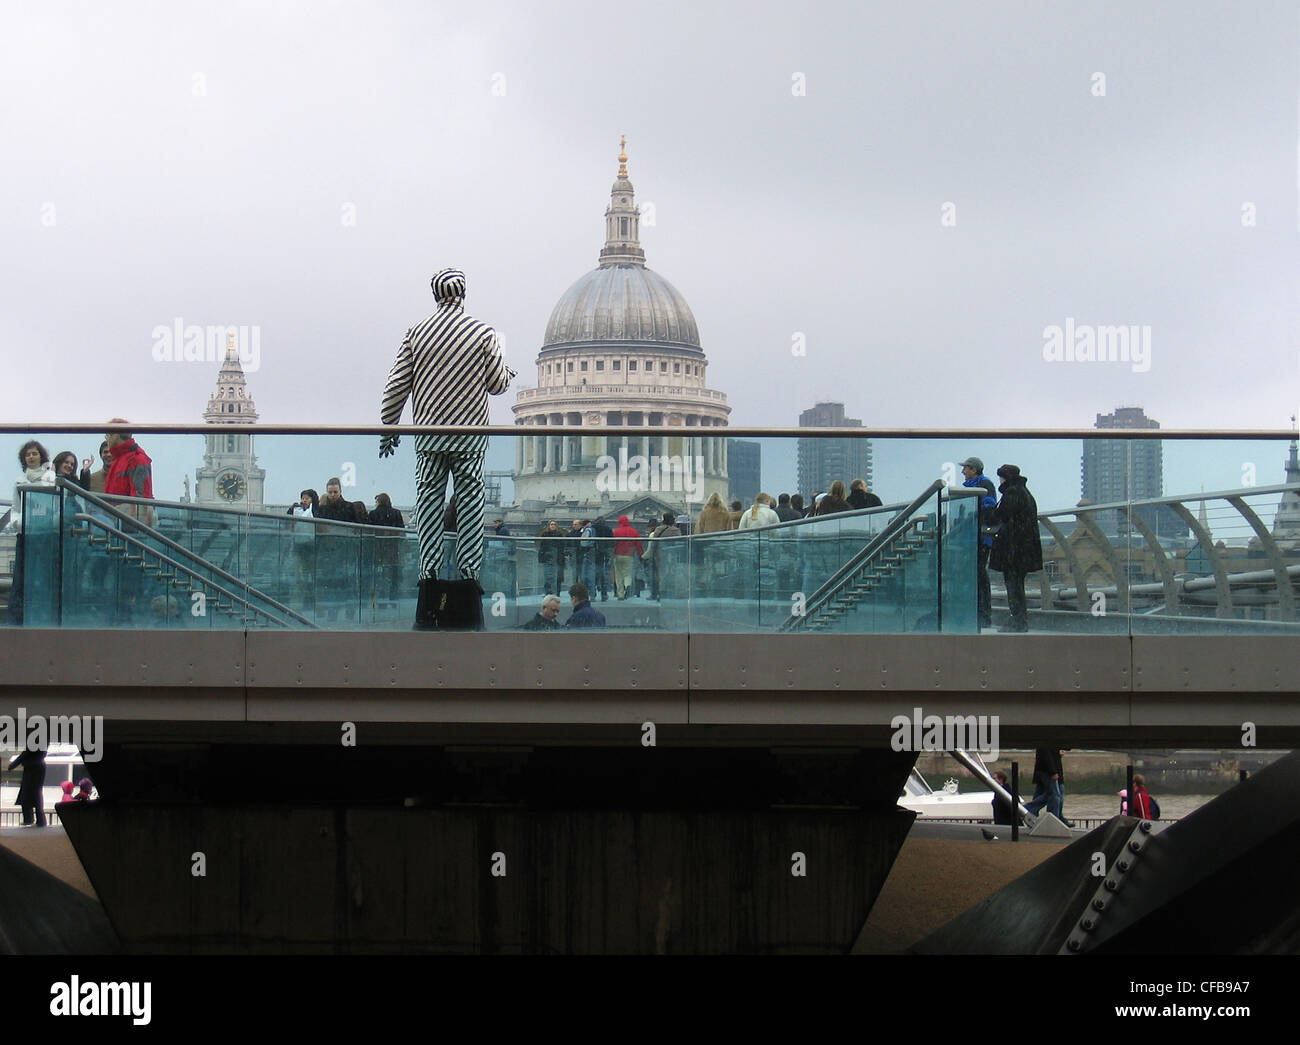 Millennium footbridge bridge facing St Pauls cathedral with human statue in the foreground Stock Photo